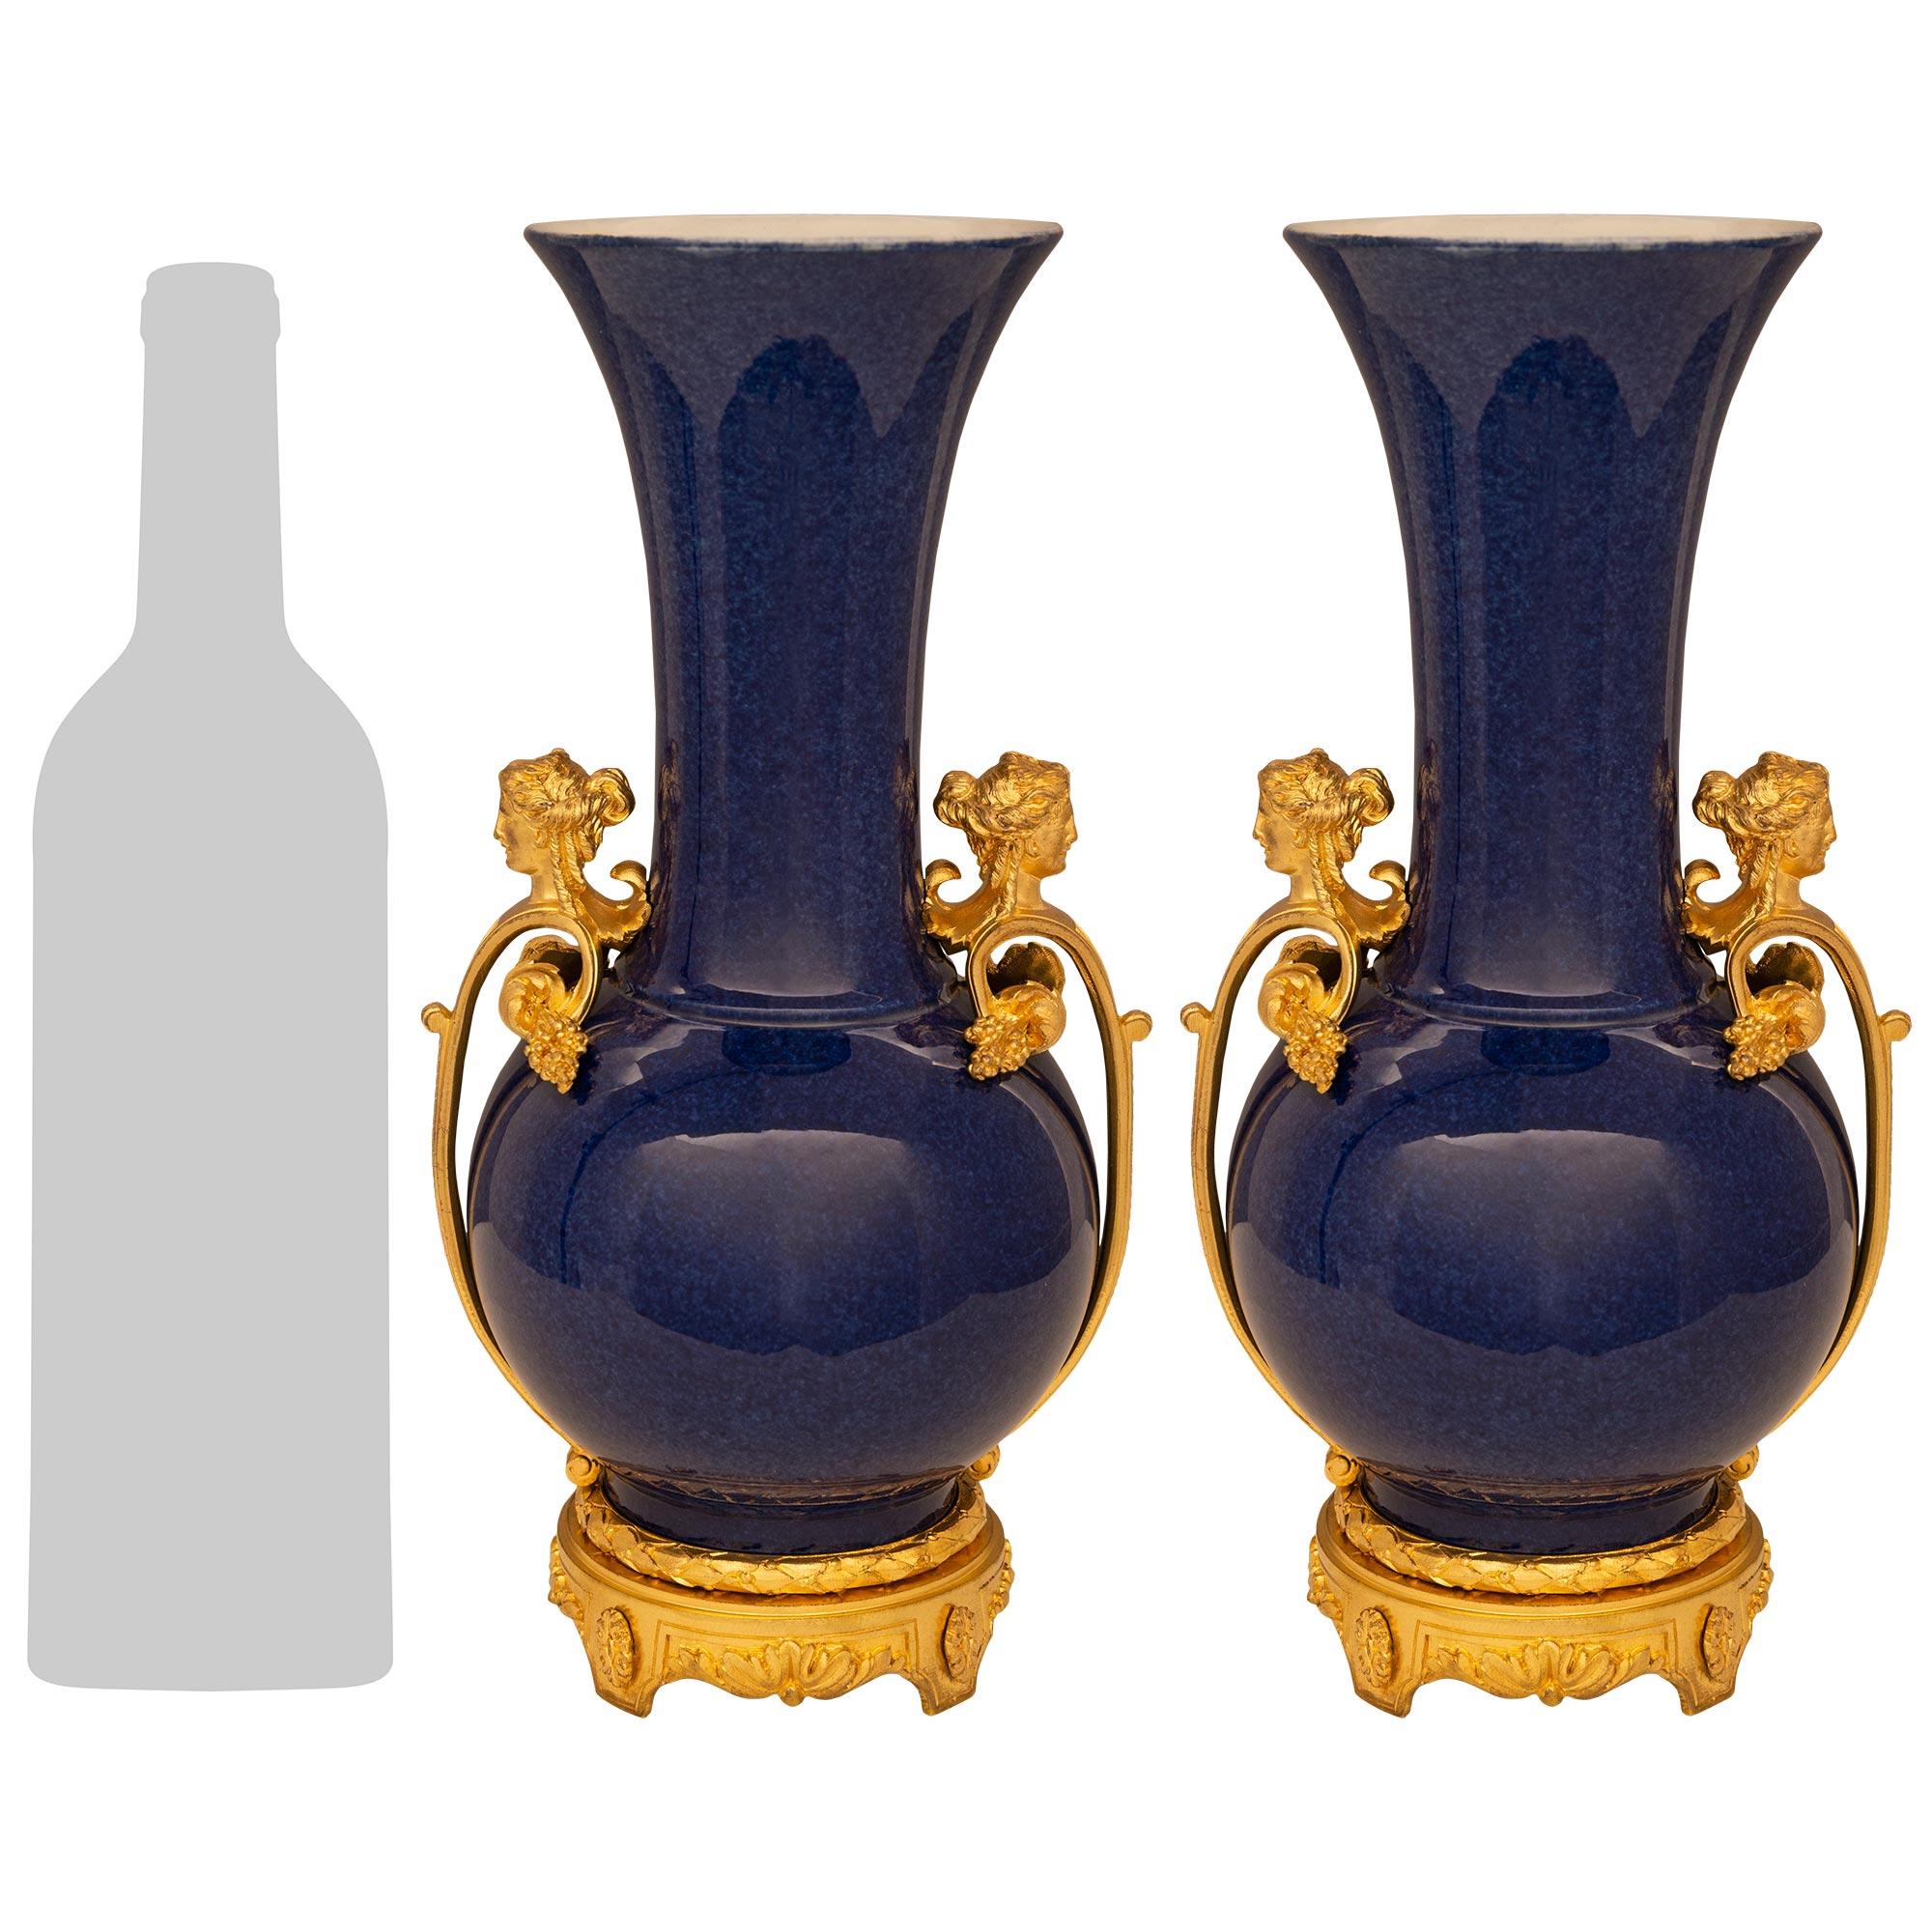 An exquisite and high quality pair of French mid 19th century Louis XVI st. blue cobalt Porcelain and Ormolu vases. Each vase is raised by a scrolled Ormolu base with acanthus leaves and rosettes, and an Ormolu berried laurel band above. The